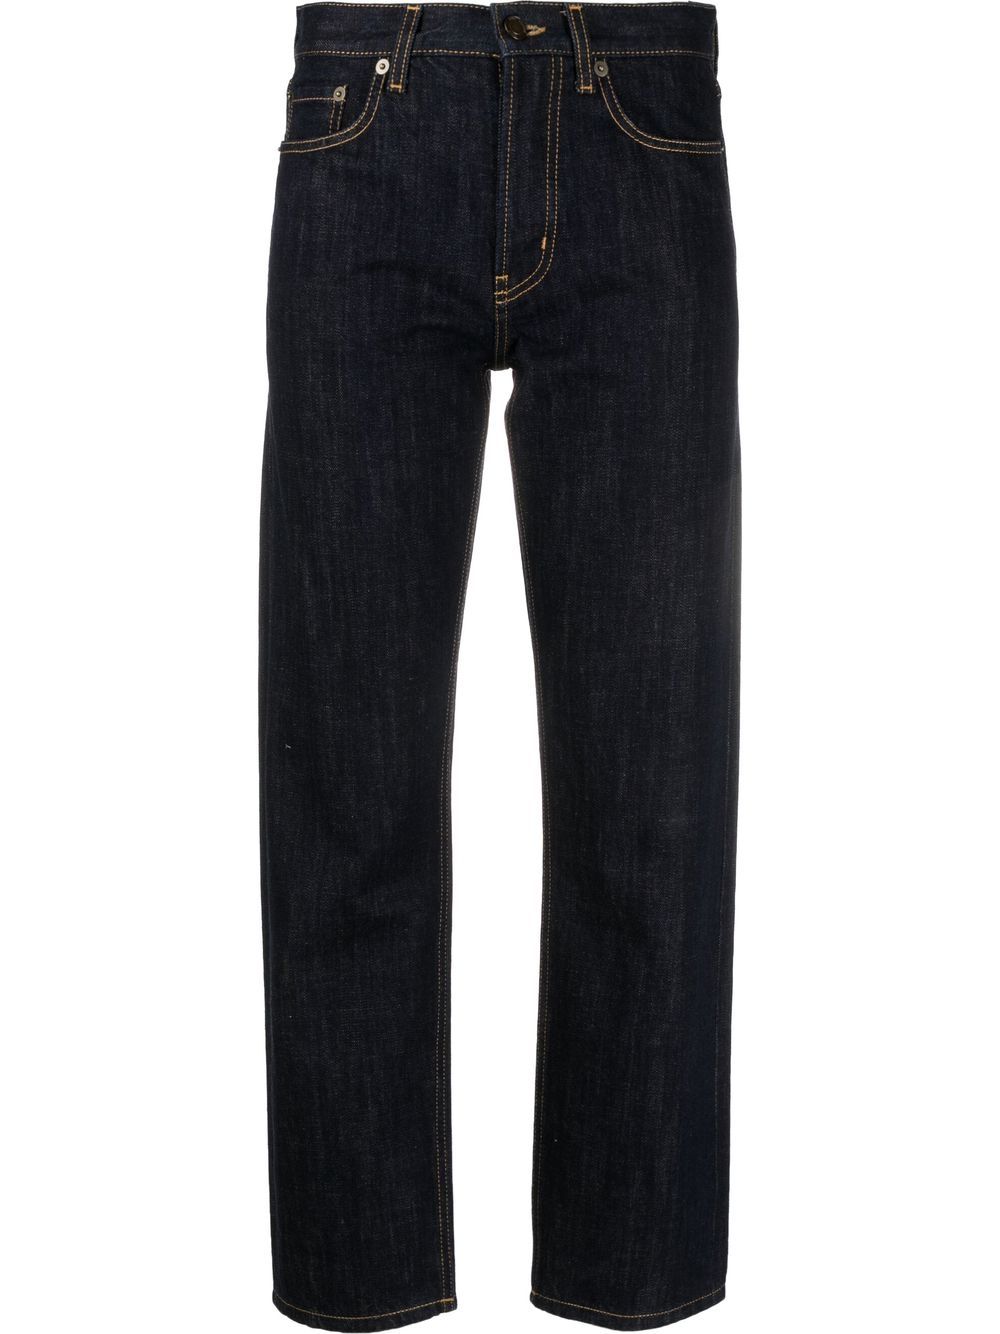 Image 1 of Saint Laurent Venice skinny cropped jeans